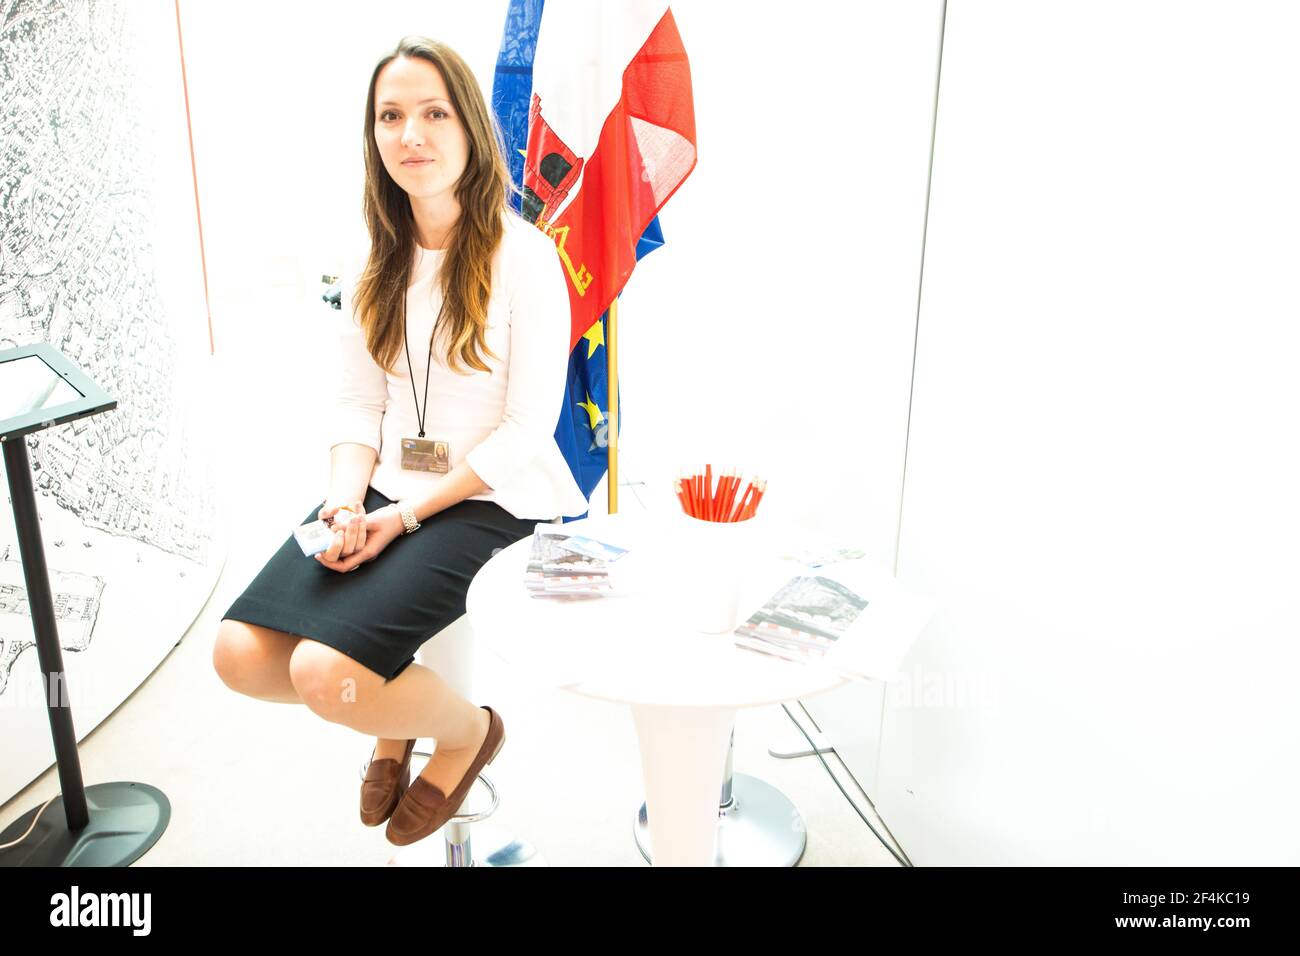 European Parliament, Brussels. Young, attractive brunette sitting in front of her Gibraltar country flags inside the Parliament building. Stock Photo